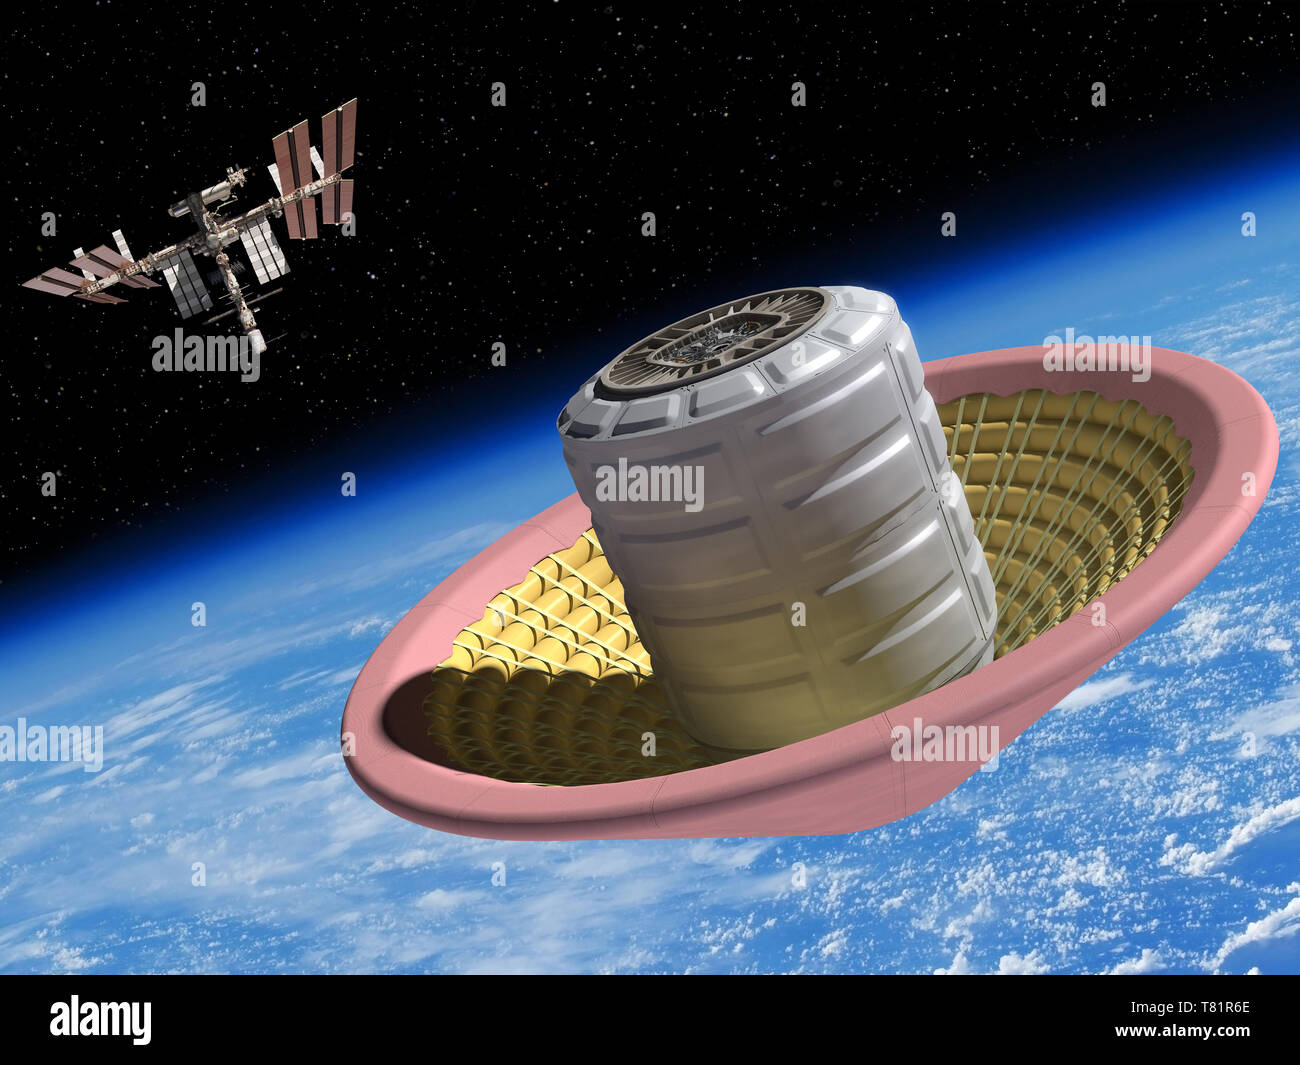 High Energy Atmospheric Reentry Test, Artist Concept Stock Photo